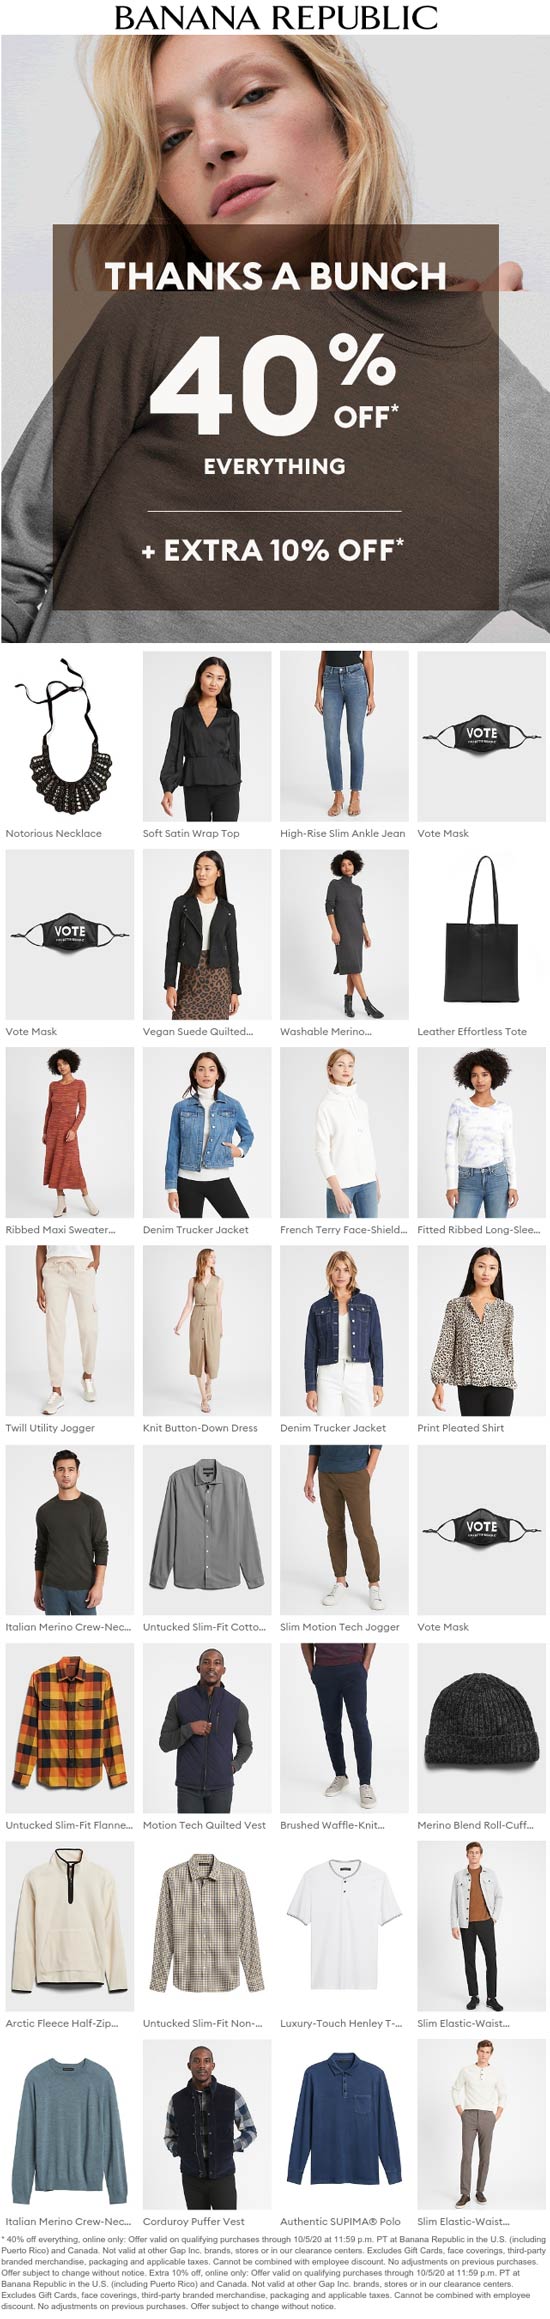 Banana Republic stores Coupon  50% off everything online at Banana Republic #bananarepublic 